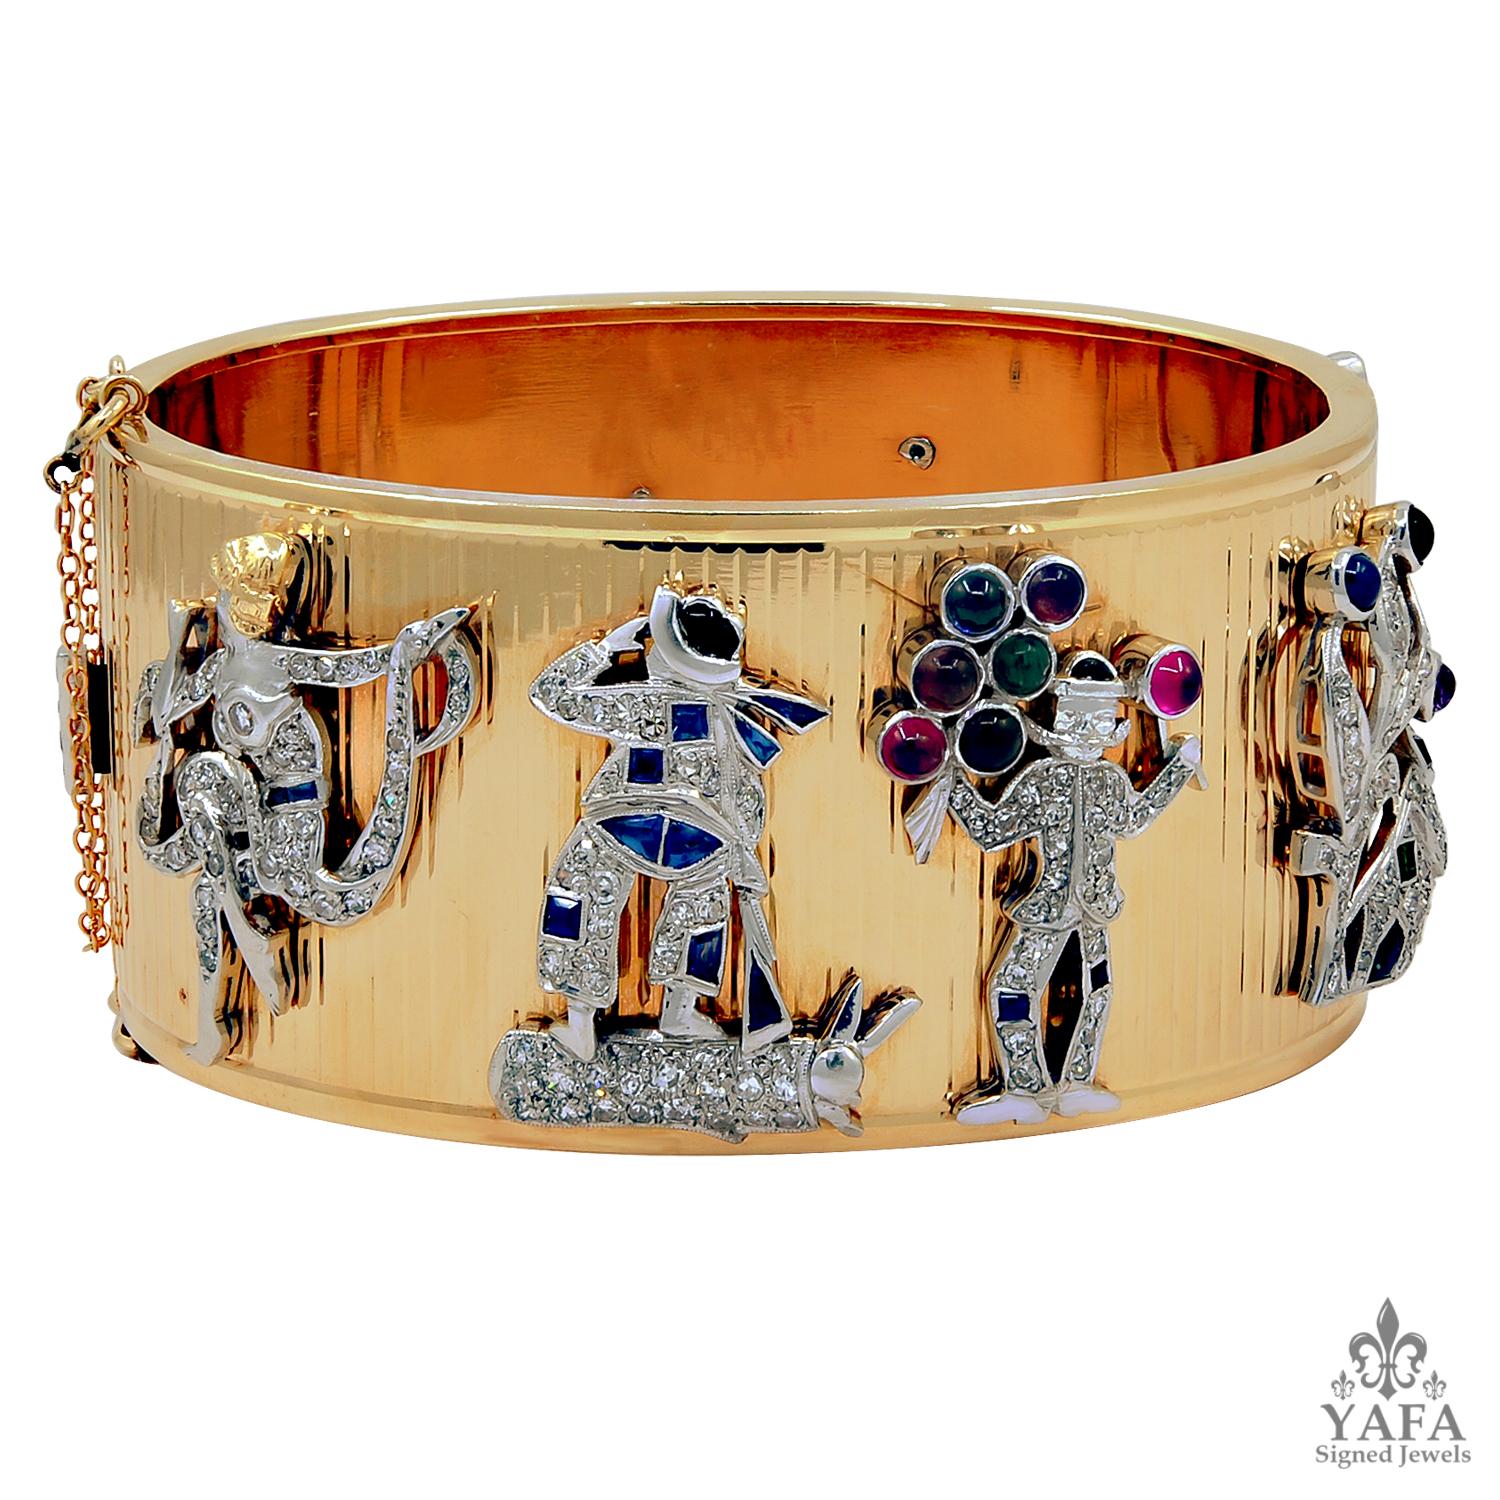 Retro Rose Gold Charm Bracelet
A retro 14k rose gold clown motif charm bangle, set with diamonds, sapphire, ruby and emerald, circa 1940s.
inner-circumference approximately 7″ in length by 1.25″ in width
